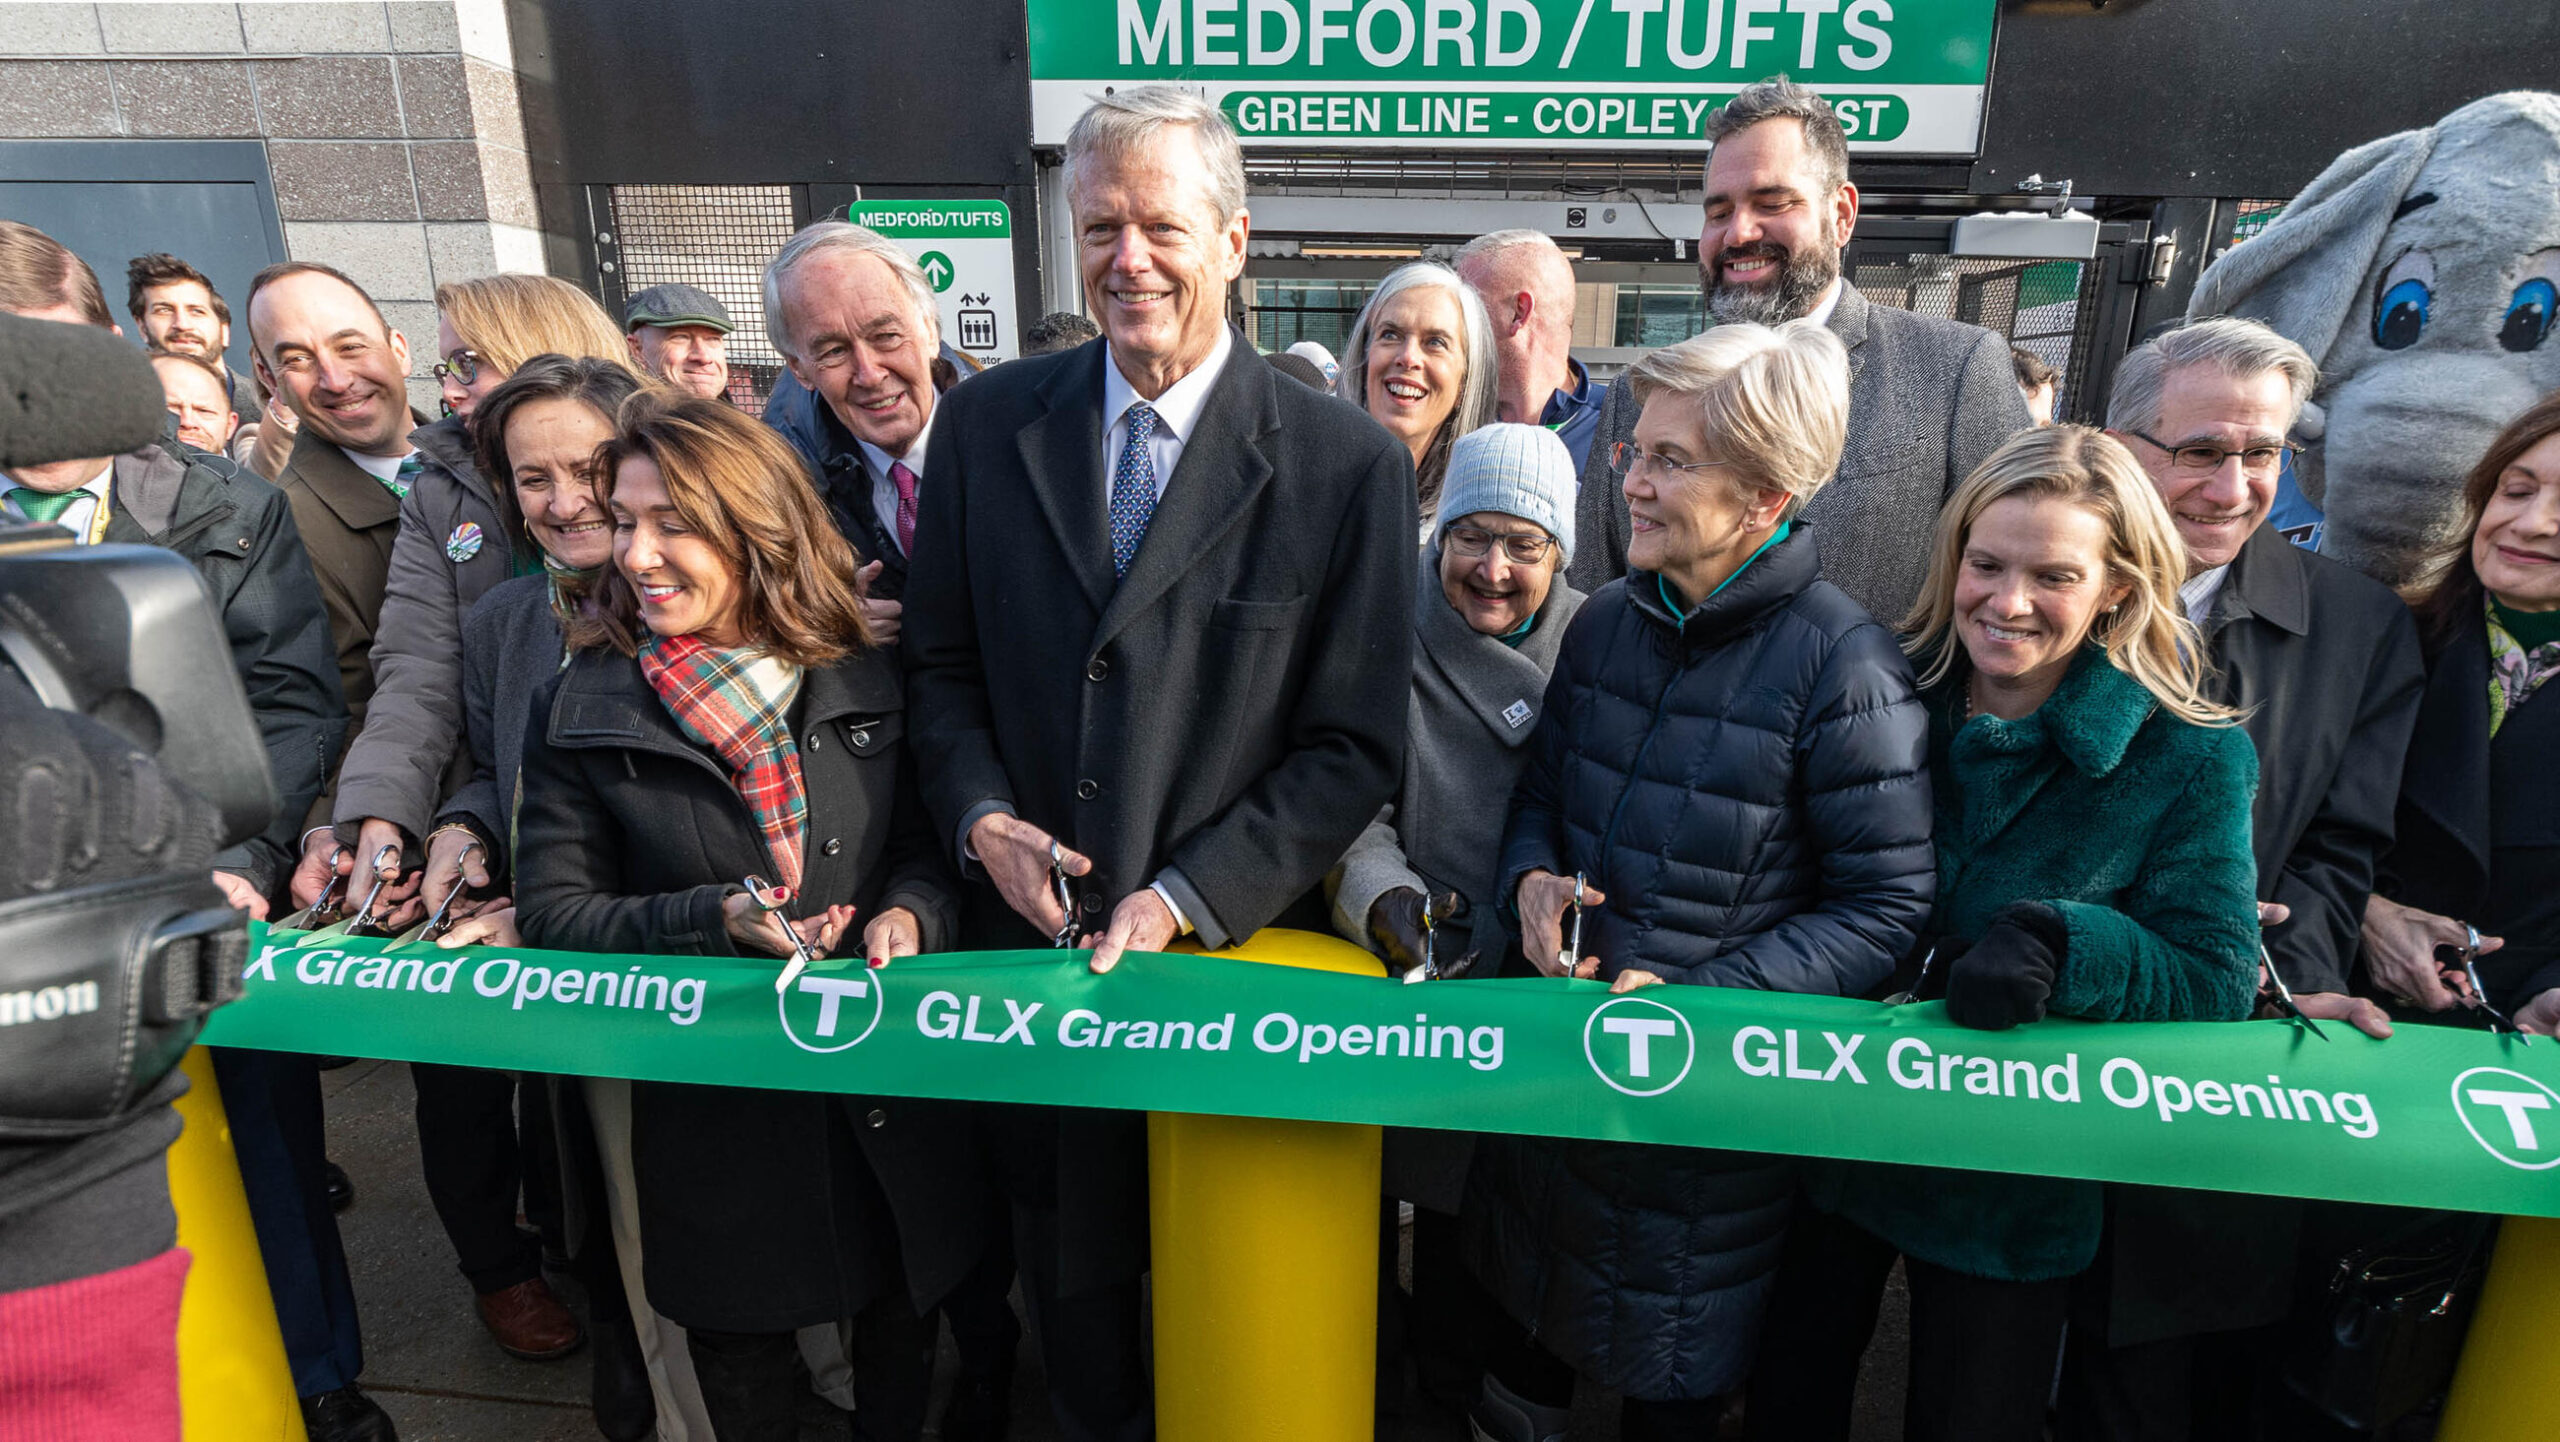 Massachusetts Governor Charlie Baker and Lt. Governor Karyn Polito were today joined by federal, state, MassDOT, MBTA, and local leadership to celebrate the opening of the Medford Branch of the Green Line Extension.